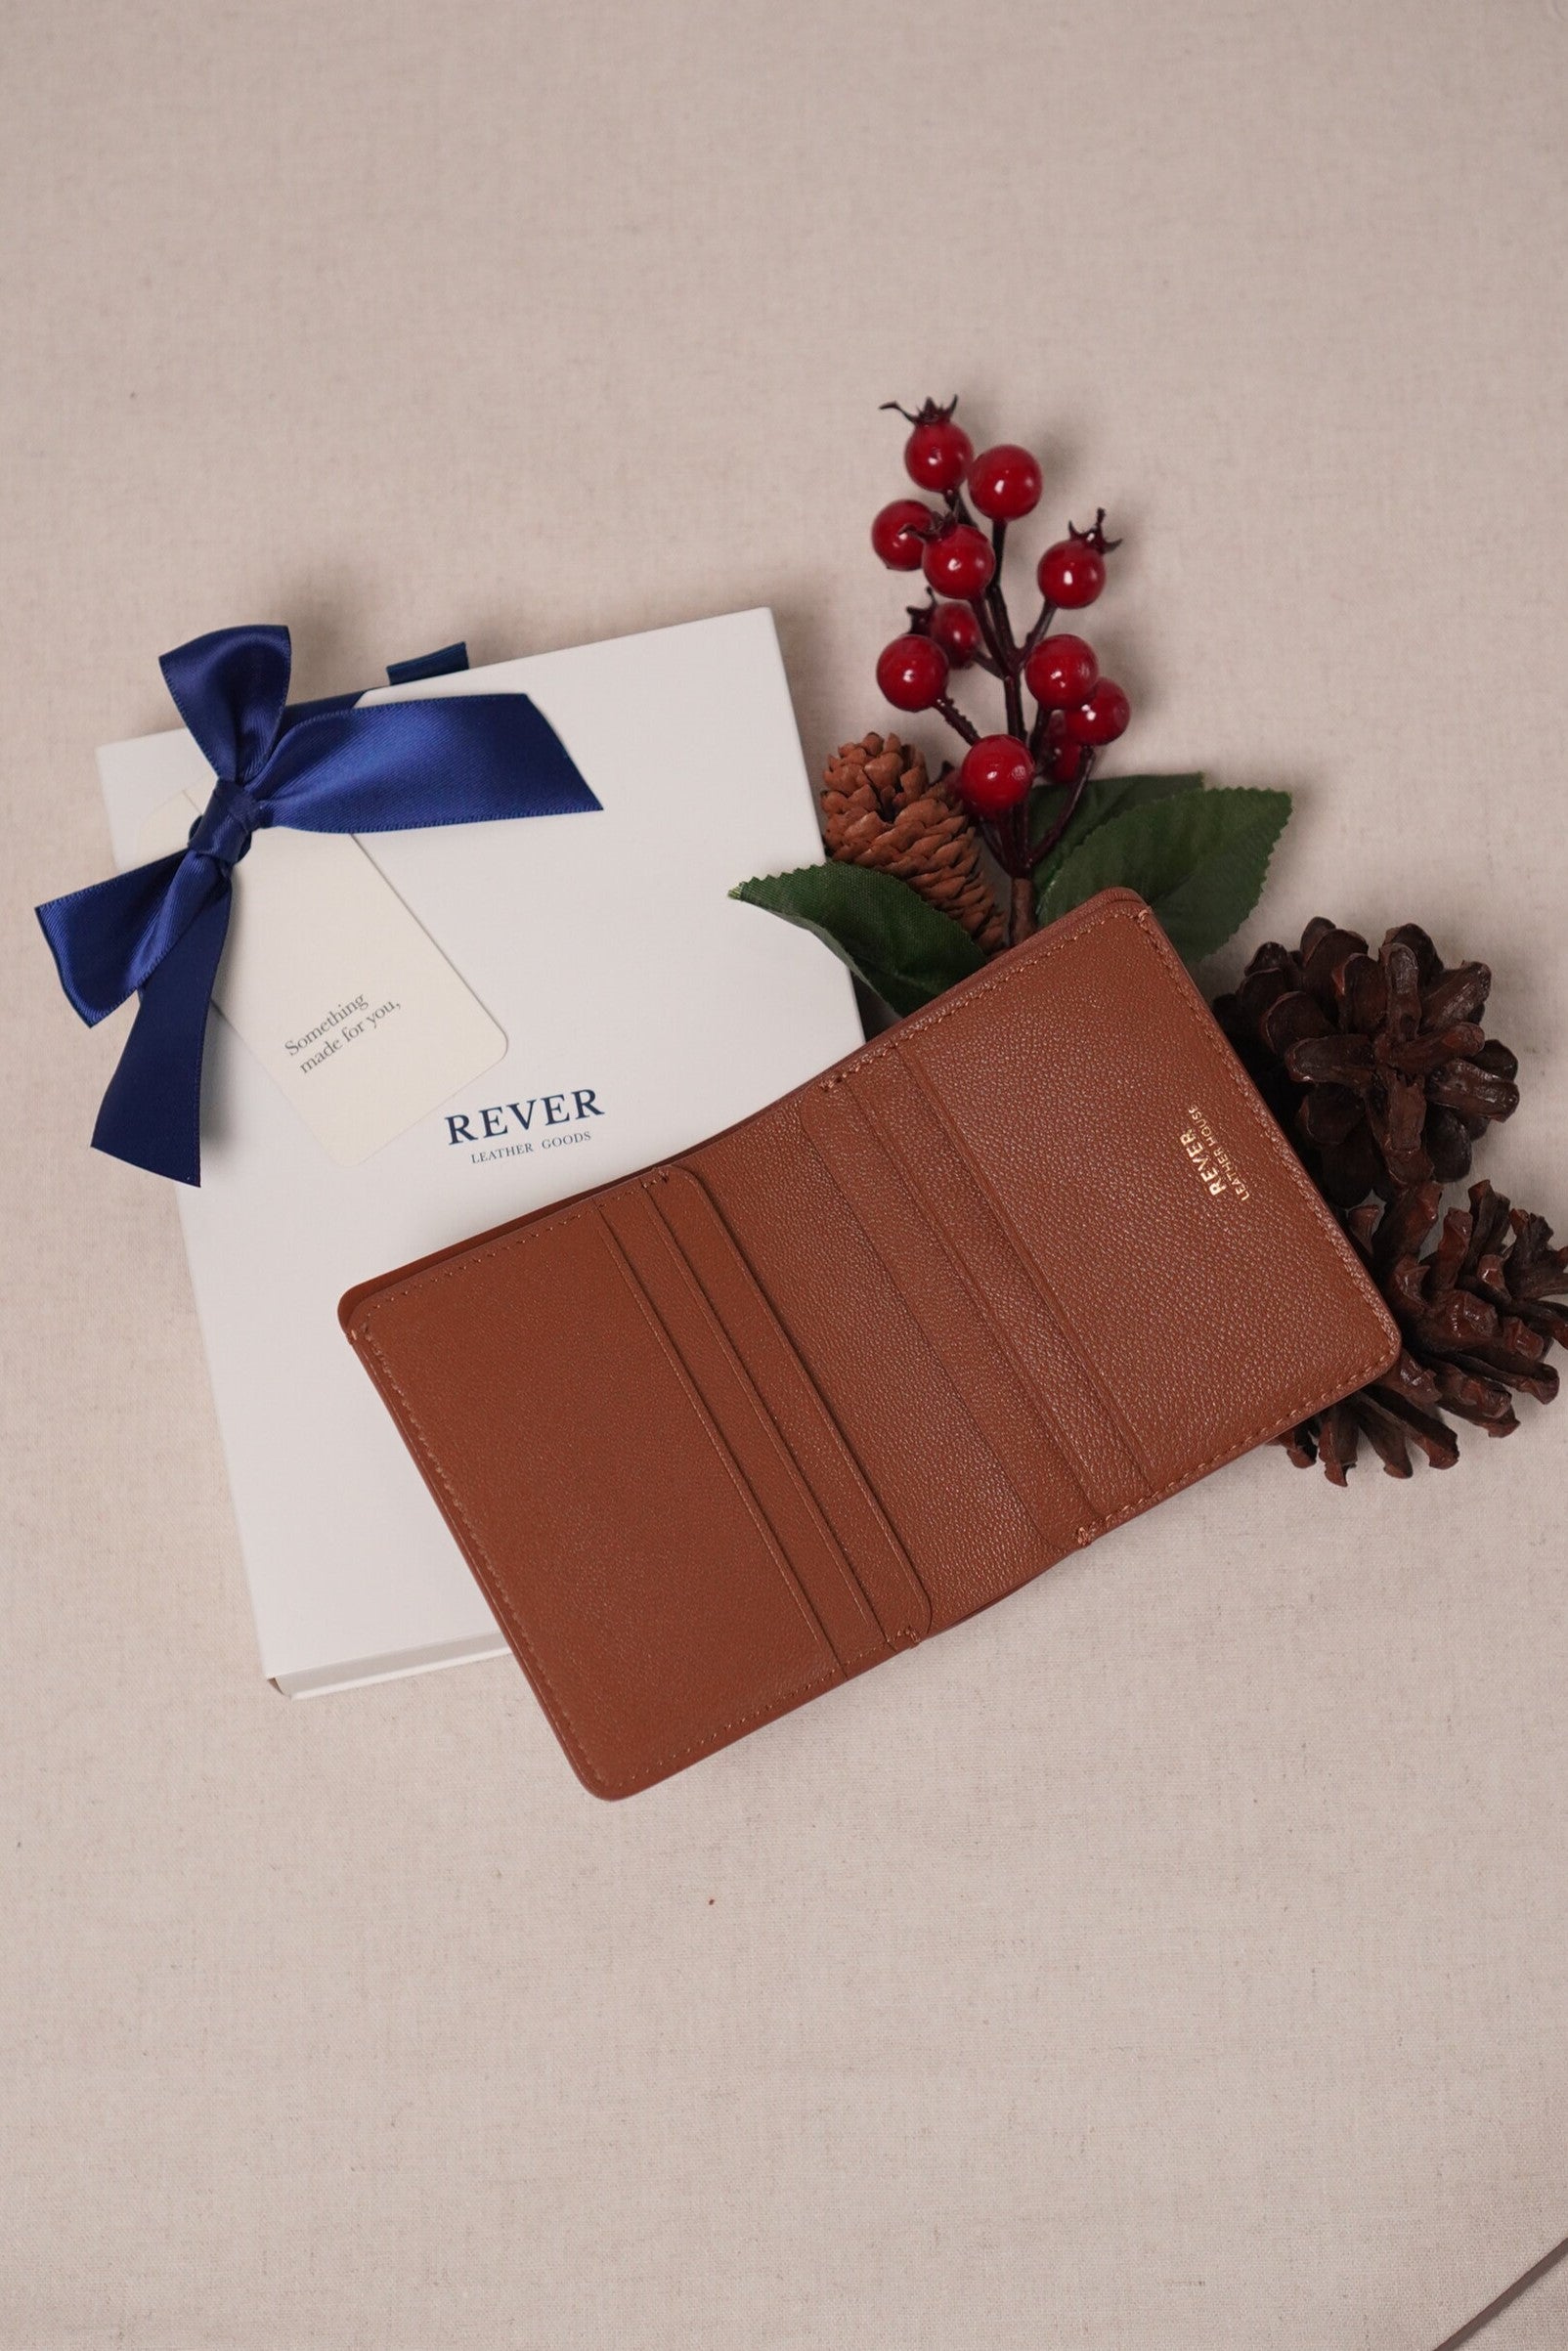 Personalised Christmas Gifts for the functionalist: Ralph Compact Wallet